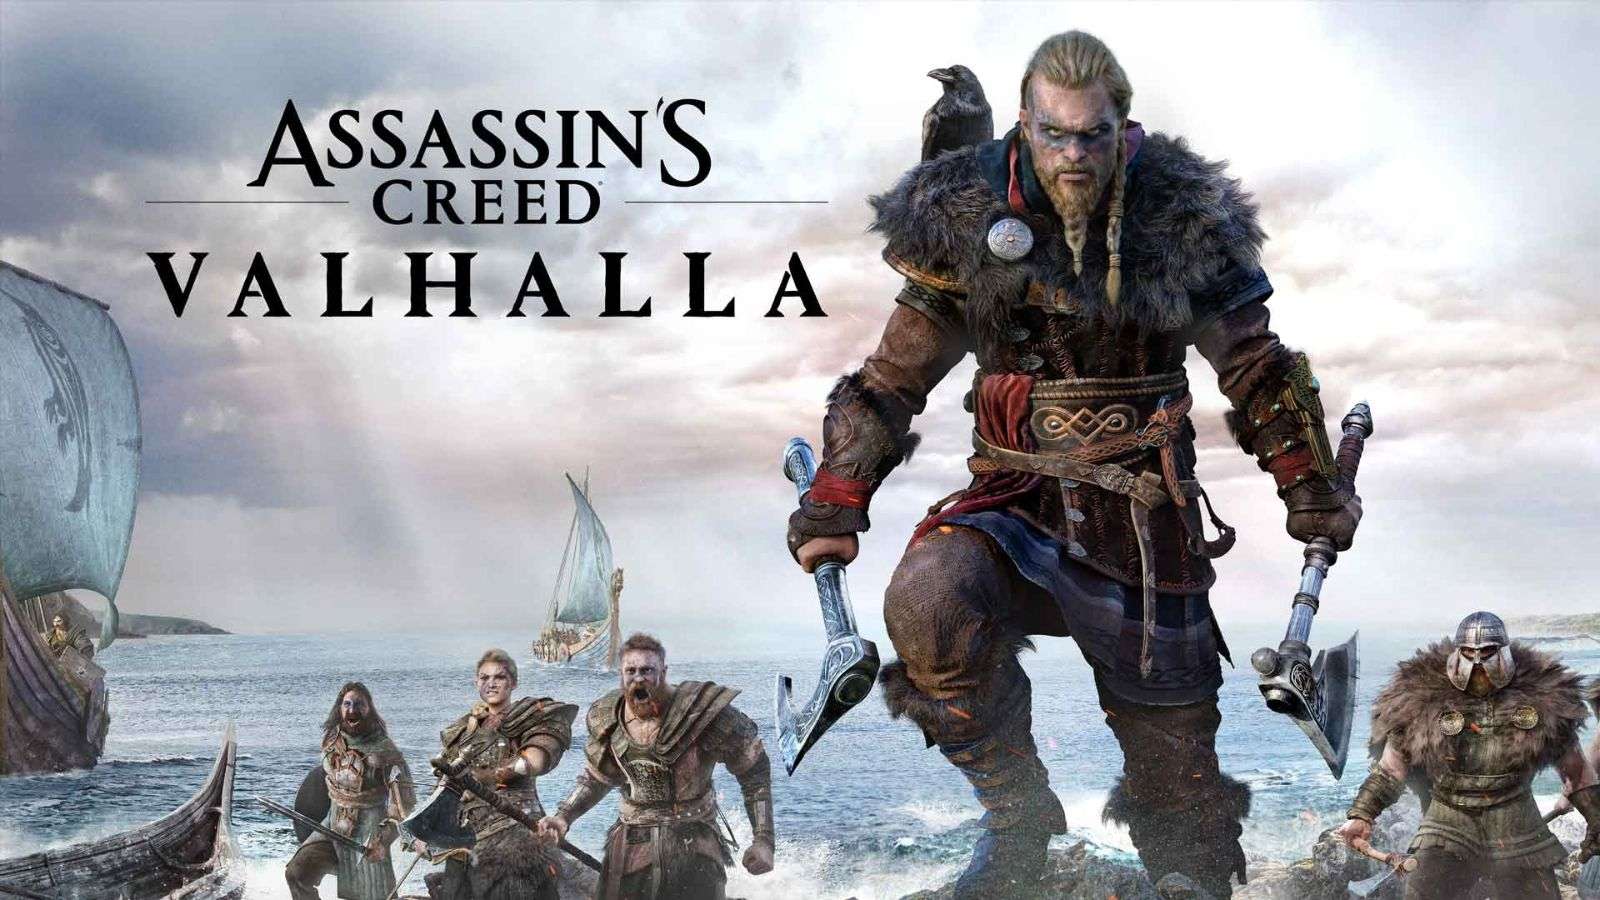 Assassin's Creed Valhalla free weekend